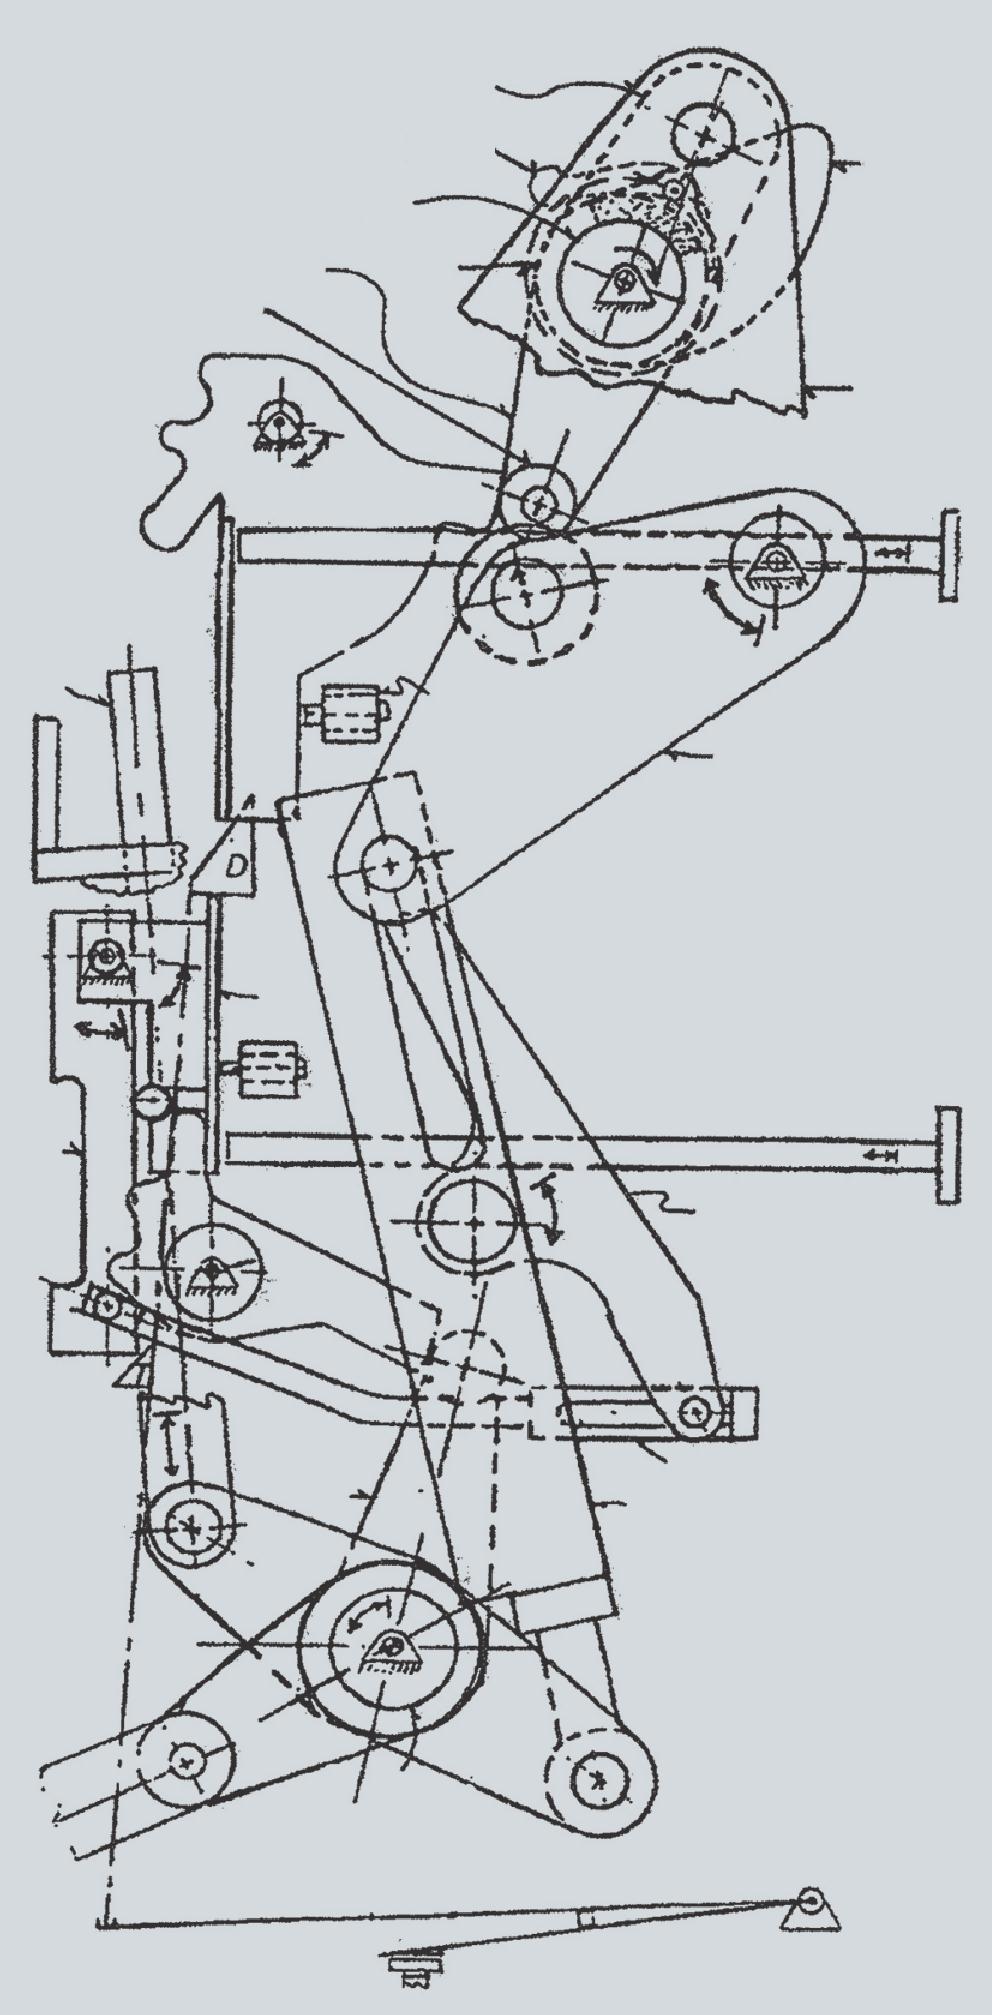 Vacuum interrupter/ operator Figure 20: Operating mechanism section diagram (drawout trip-free linkage shown) mechanism CLOSED, closing spring CHARGED 62.5.2 - Close latch pawl 62.8.